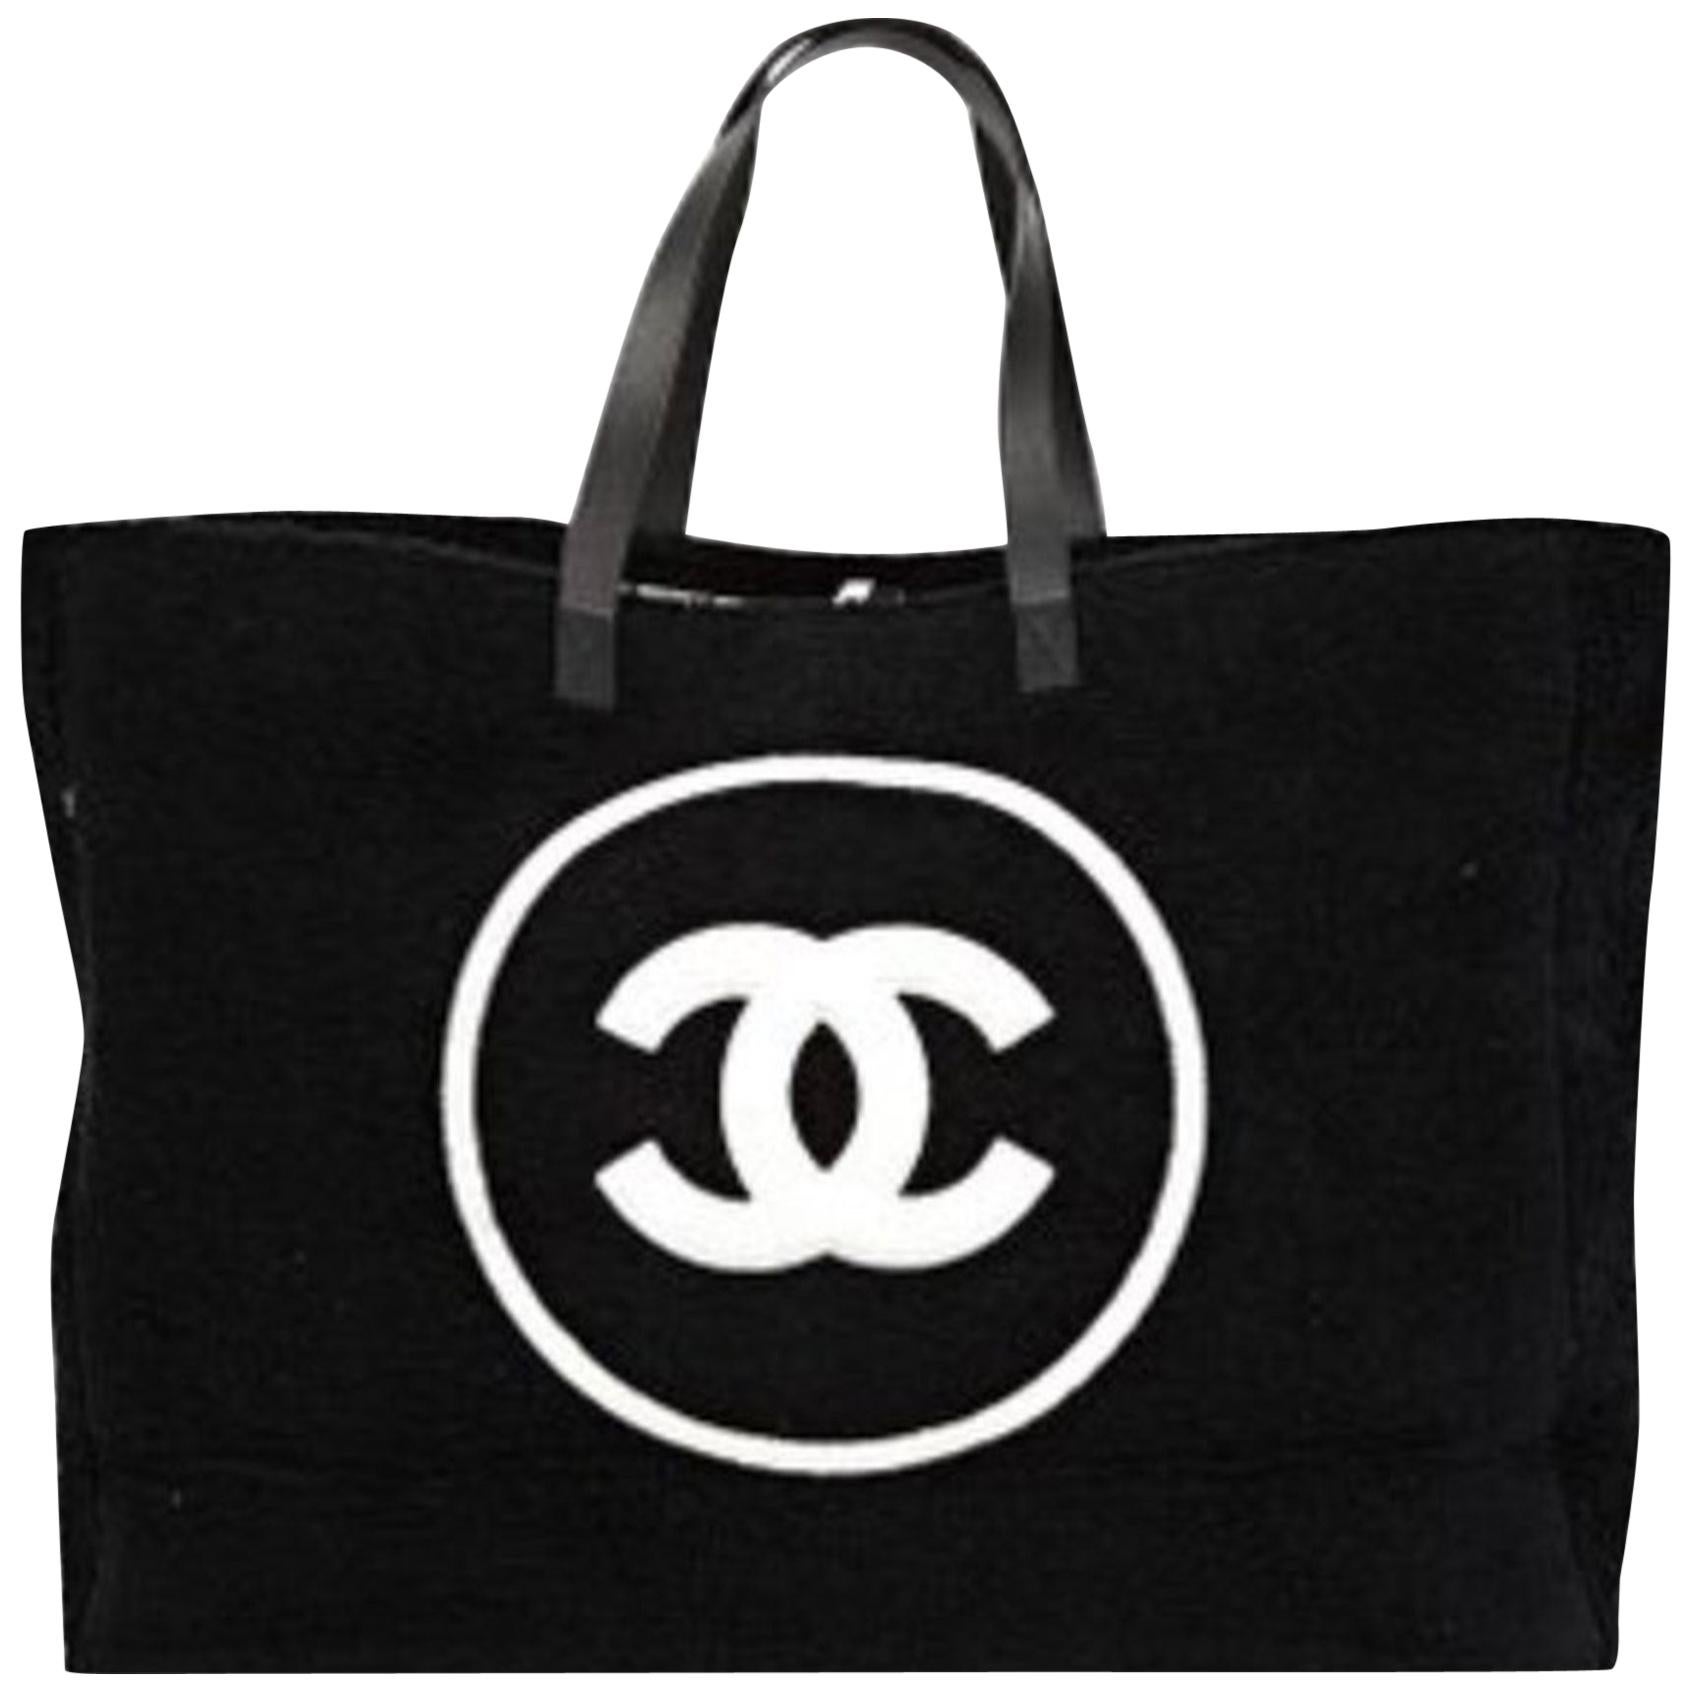 Chanel Shopping Top Handle Tote Cotton Beach Black and White Terry Cloth Bag For Sale